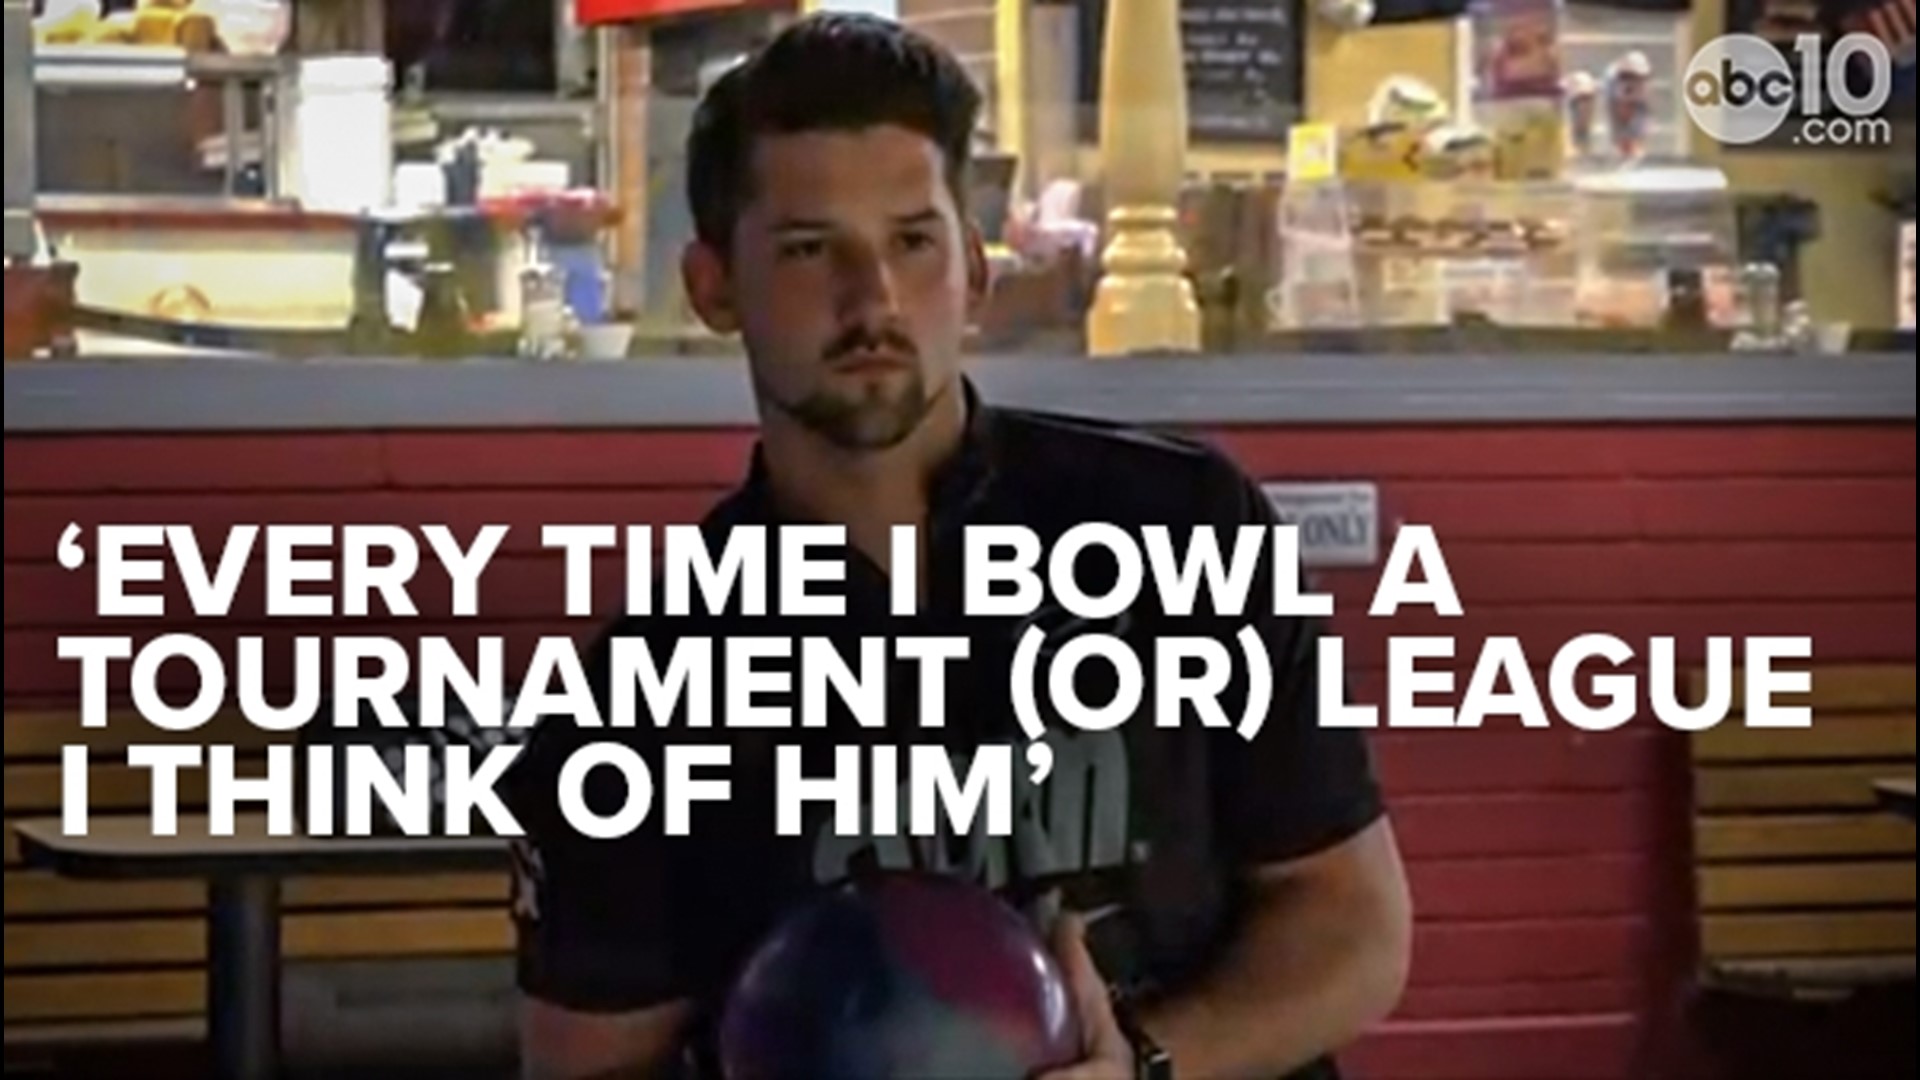 Stockton native and professional bowler Forrest Kritzer says he's bowled his latest tournaments with his late brother as inspiration. Kritzer is now a PBA member.